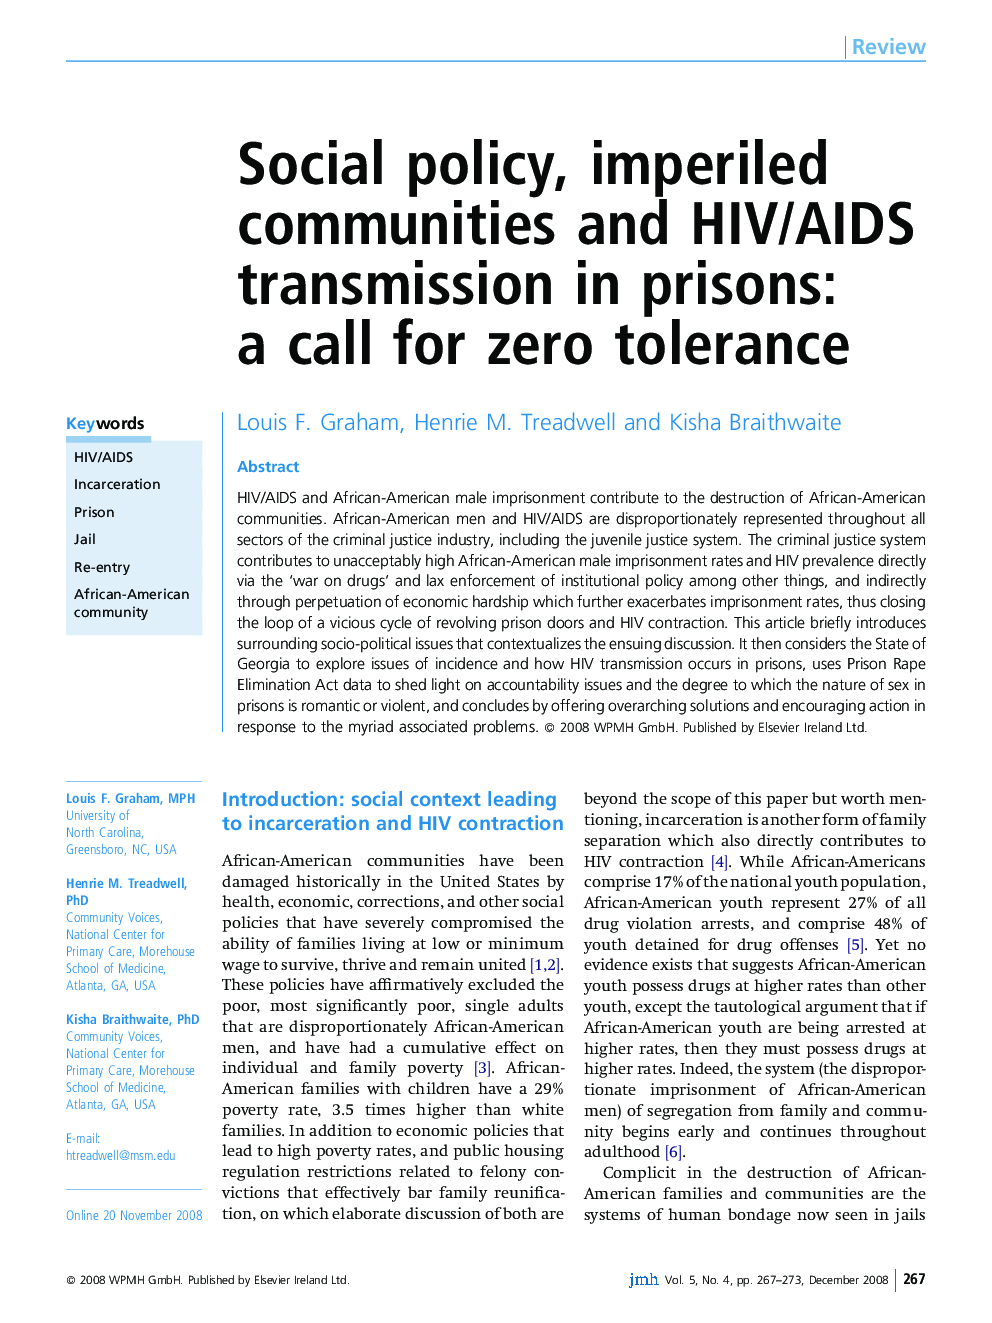 Social policy, imperiled communities and HIV/AIDS transmission in prisons: a call for zero tolerance